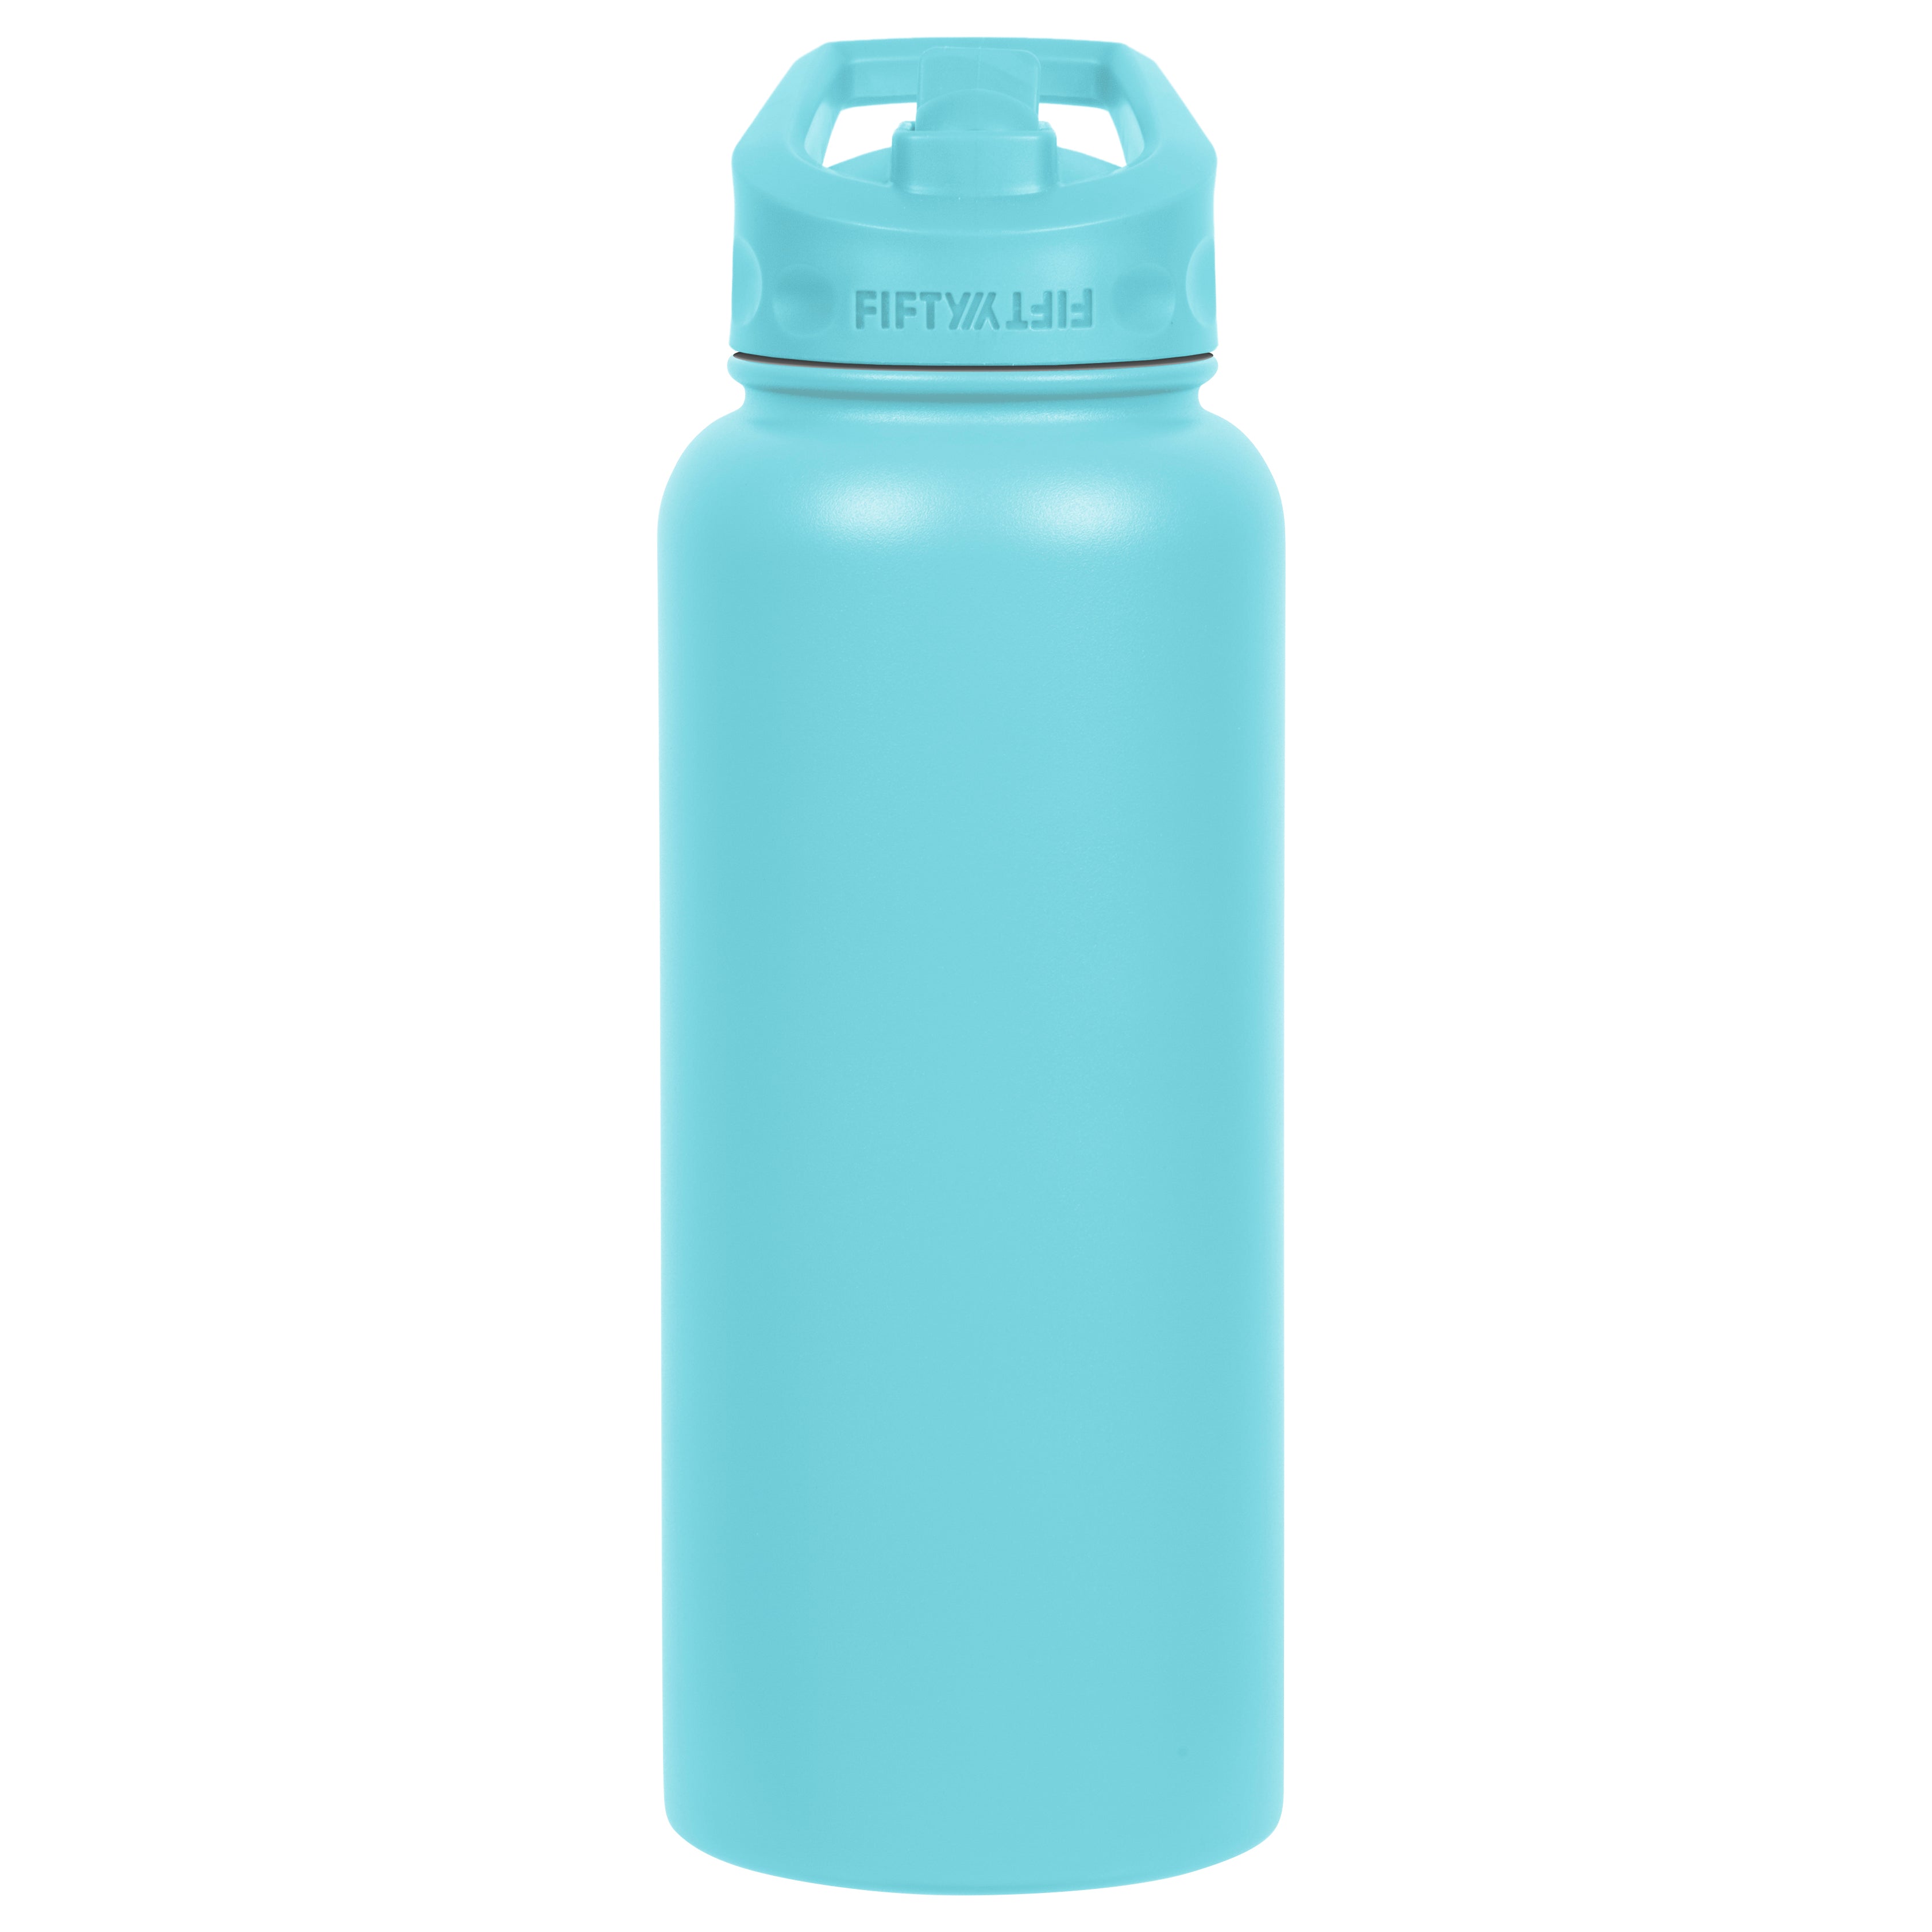 BOZ Stainless Steel Water Bottle XL (1 L / 32oz) Wide Mouth (Green), 1 -  Foods Co.